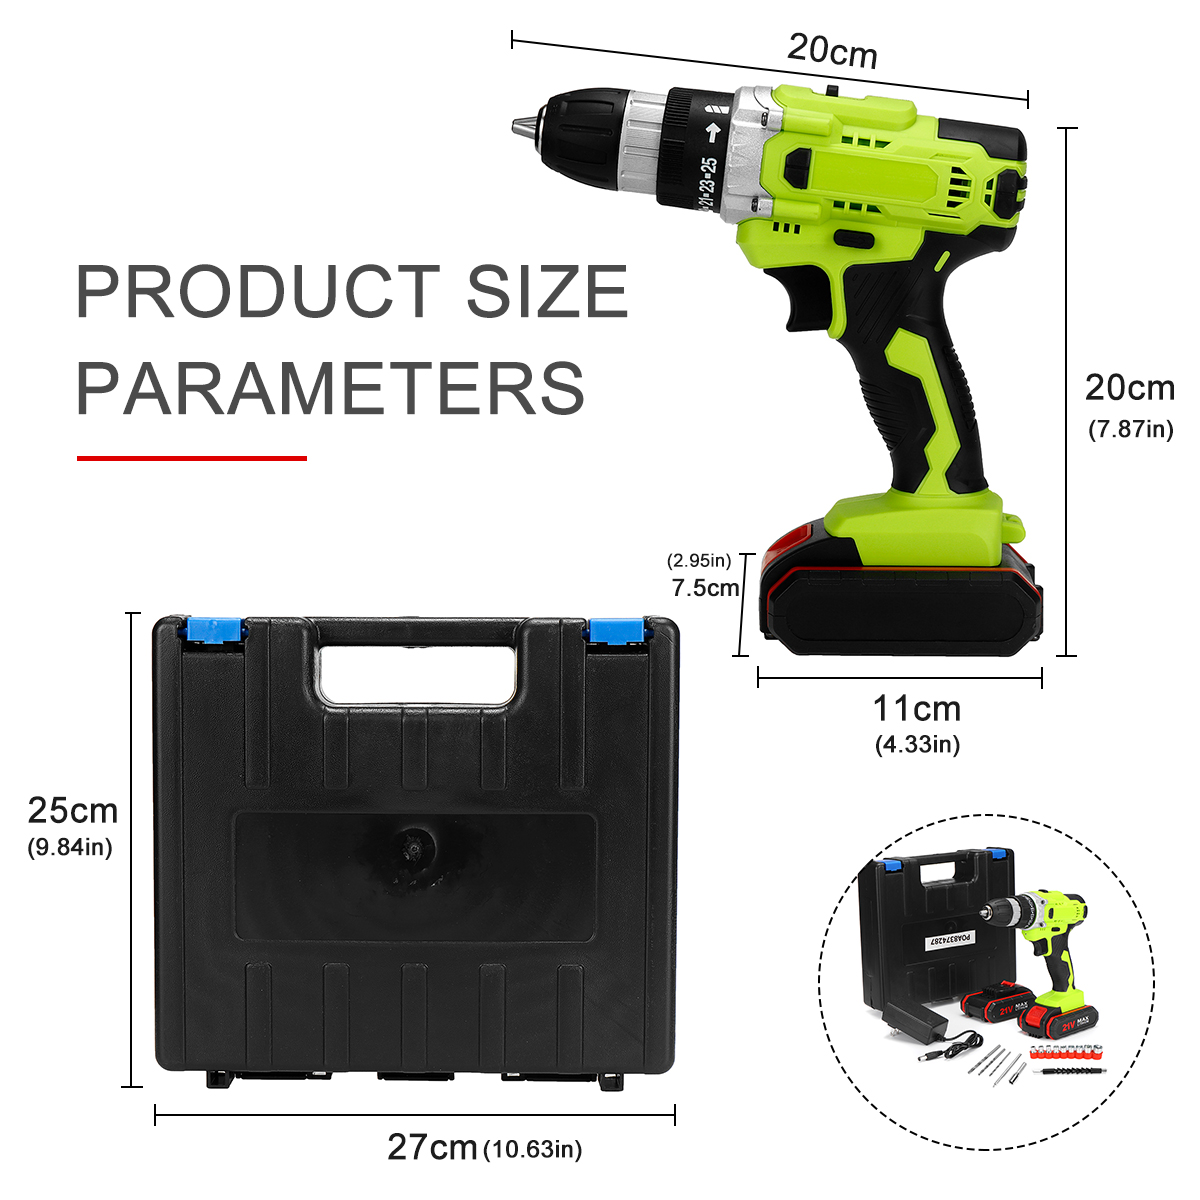 21V-Cordless-Impact-Drill-Set-3-IN-1-Electric-Torque-Wrench-Screwdriver-Drill-W-1-Or-2-Battery-Comes-1837421-15